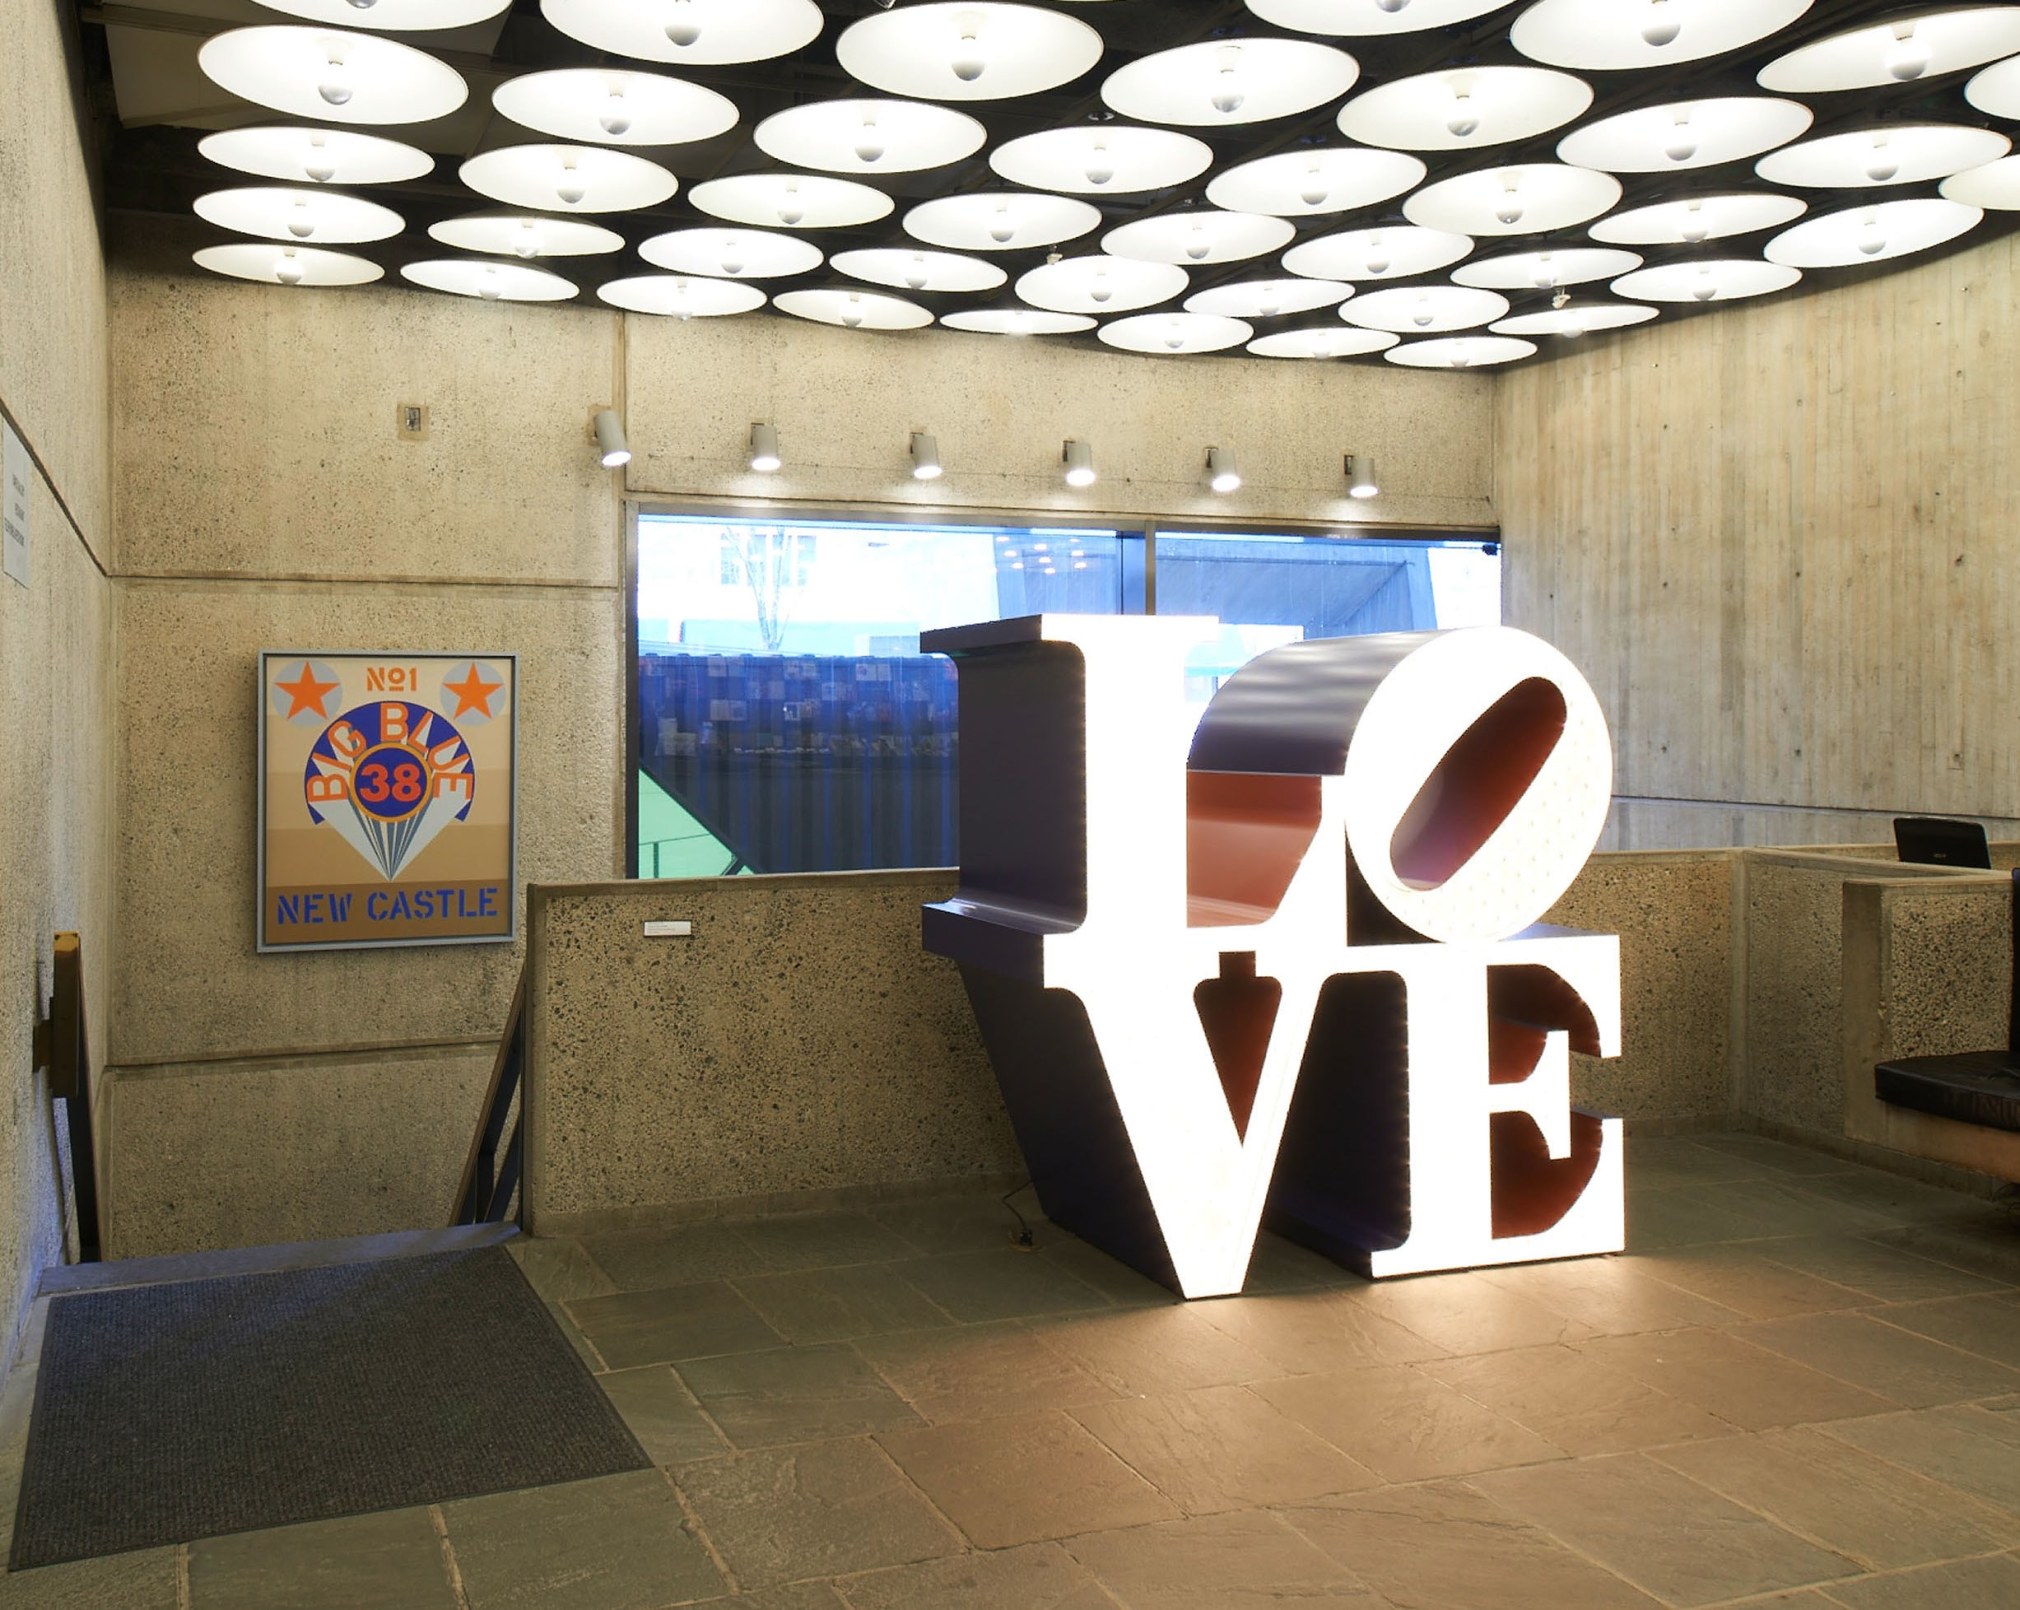 Installation view of Robert Indiana: Beyond LOVE,&nbsp;Whitney Museum of American Art, New York, September 26, 2013&ndash;January 5, 2014. Left to right,&nbsp;New Castle (1969) and&nbsp;The Electric LOVE (1966&ndash;2000), &nbsp;